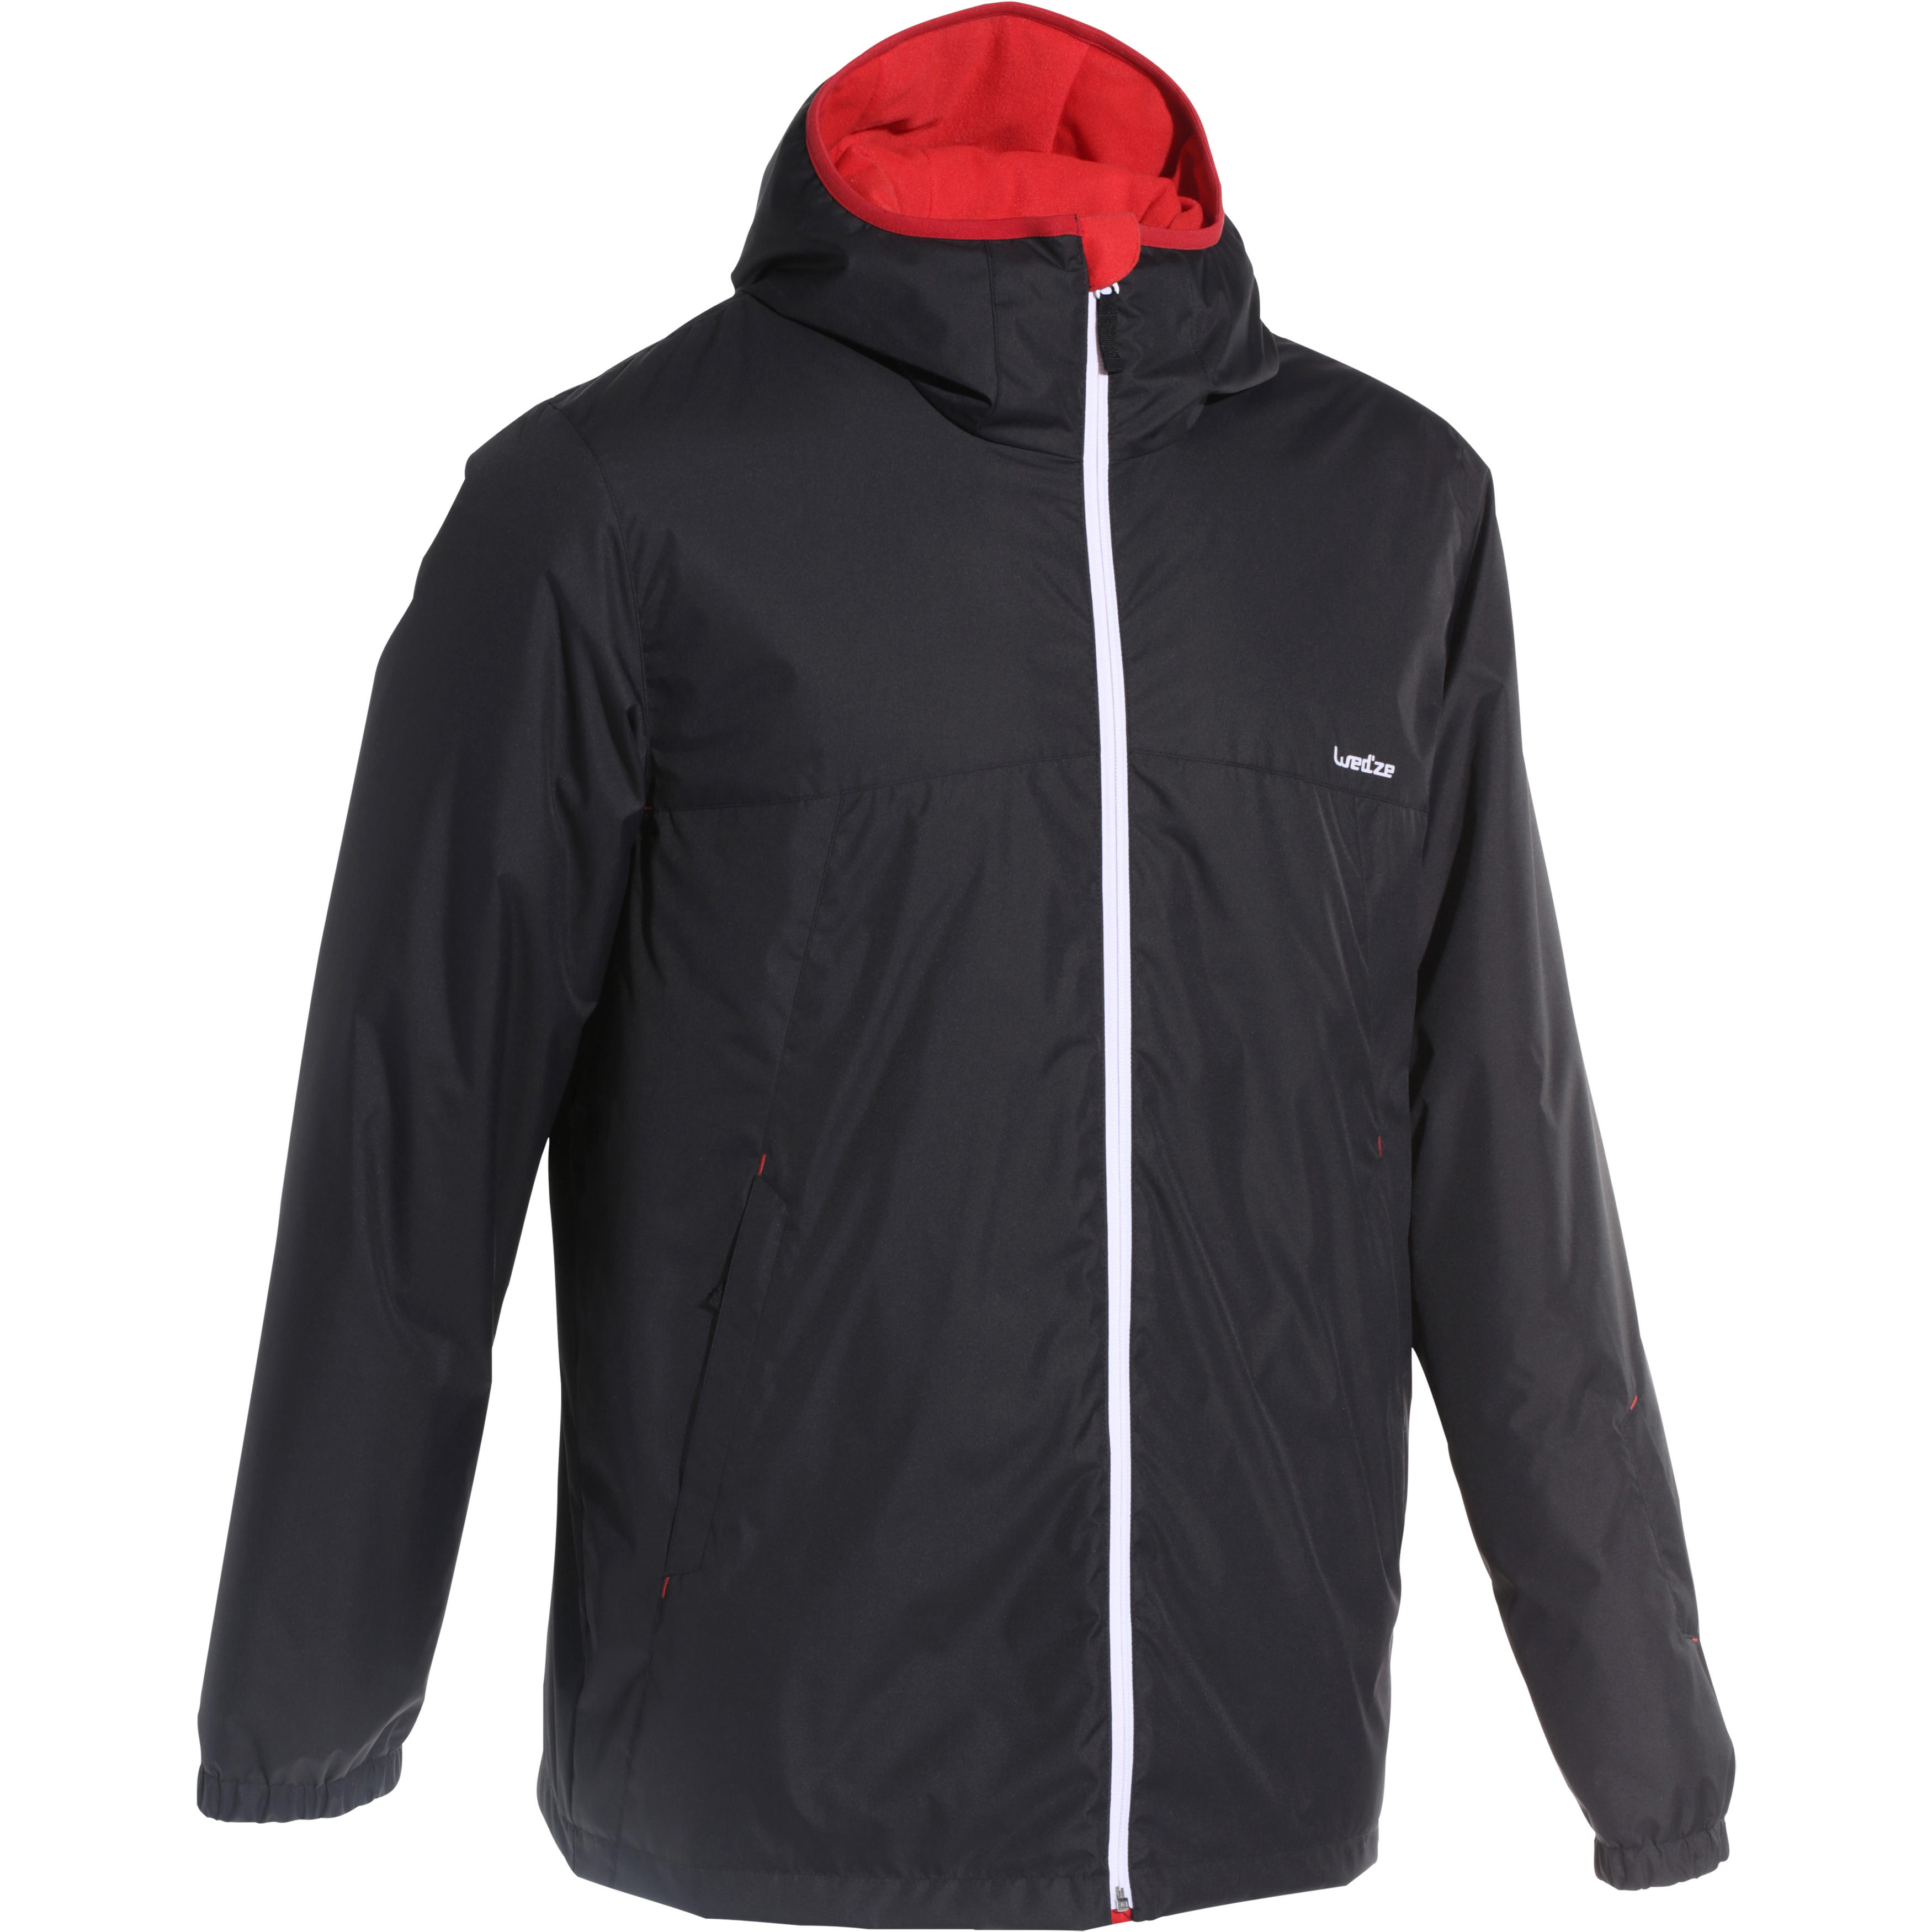 Buy Winter Collection from Decathlon India